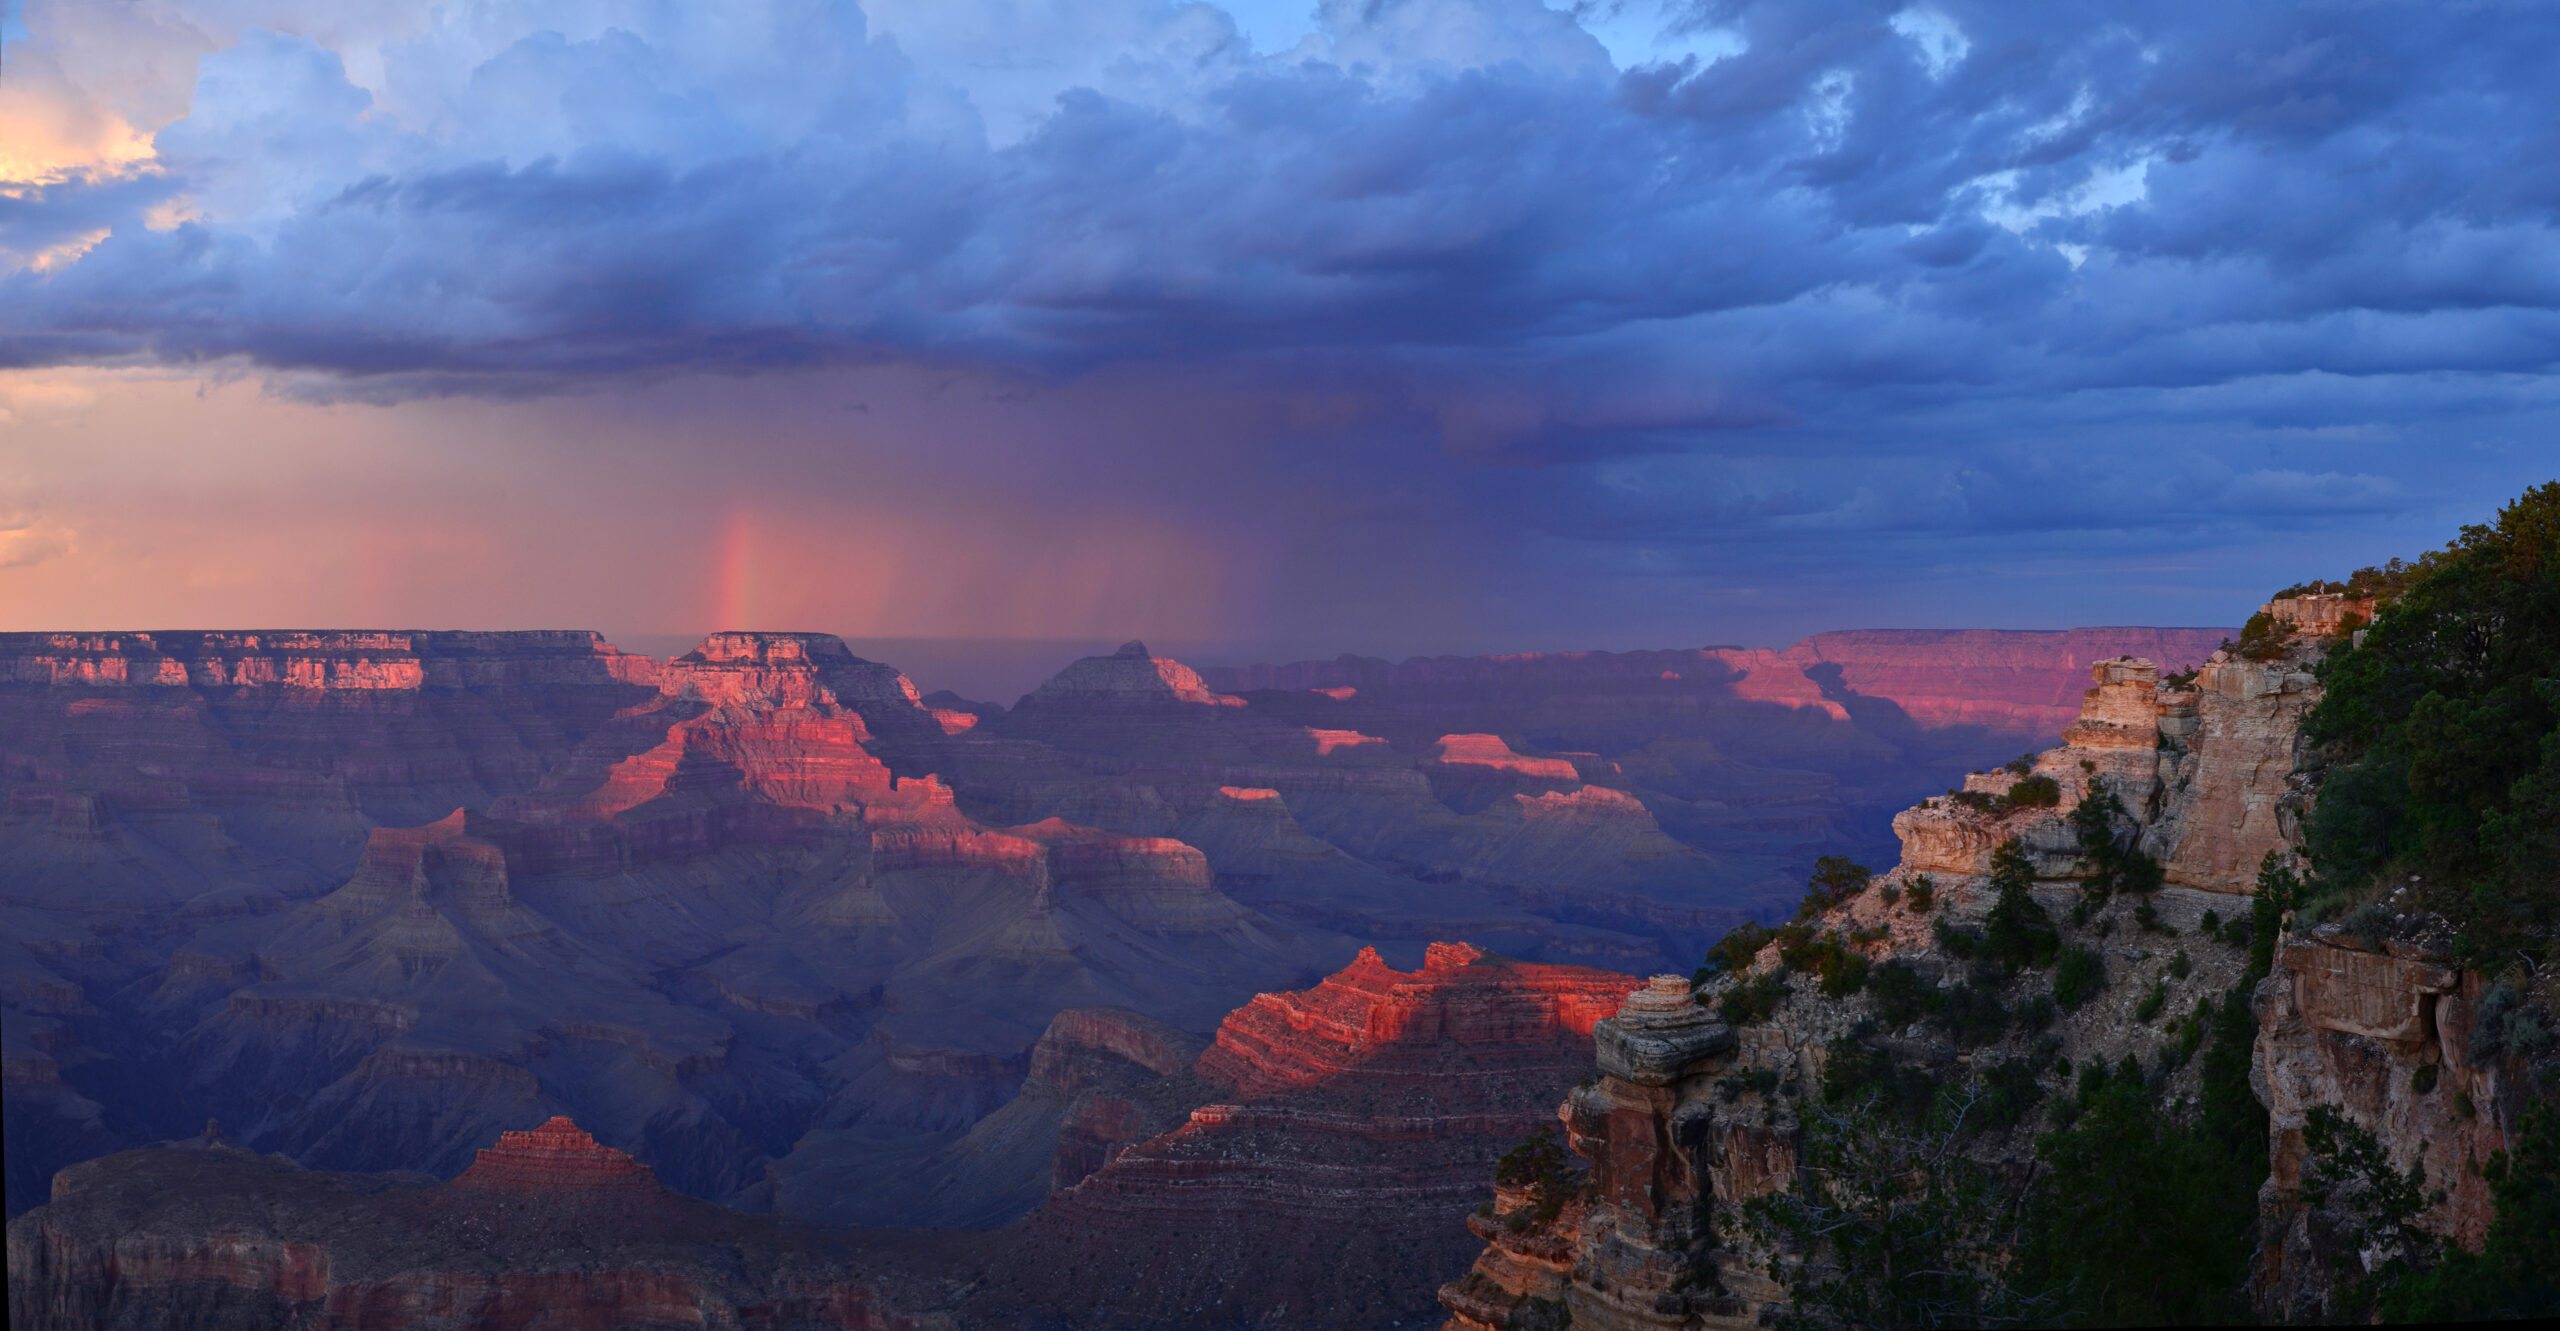 Moody sunset photo of the Grand Canyon with low-hanging clouds, rain and portion of a rainbow in the distance, with low-angled sun illuminating buttes and cliffs.